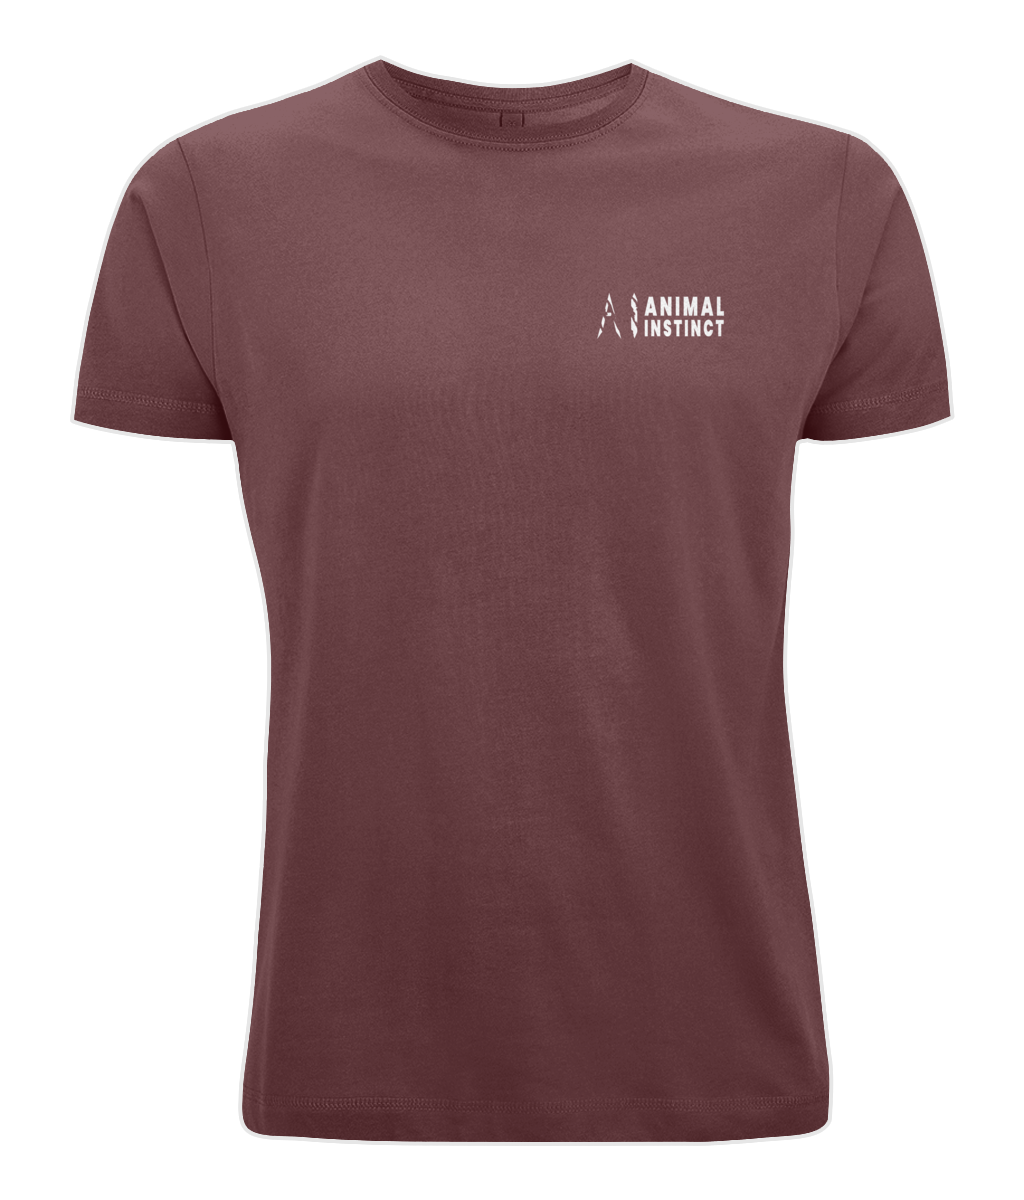 Mens brown burgundy Casual Cotton T-Shirt with White AI logo and Animal Instinct in White writing on the left chest